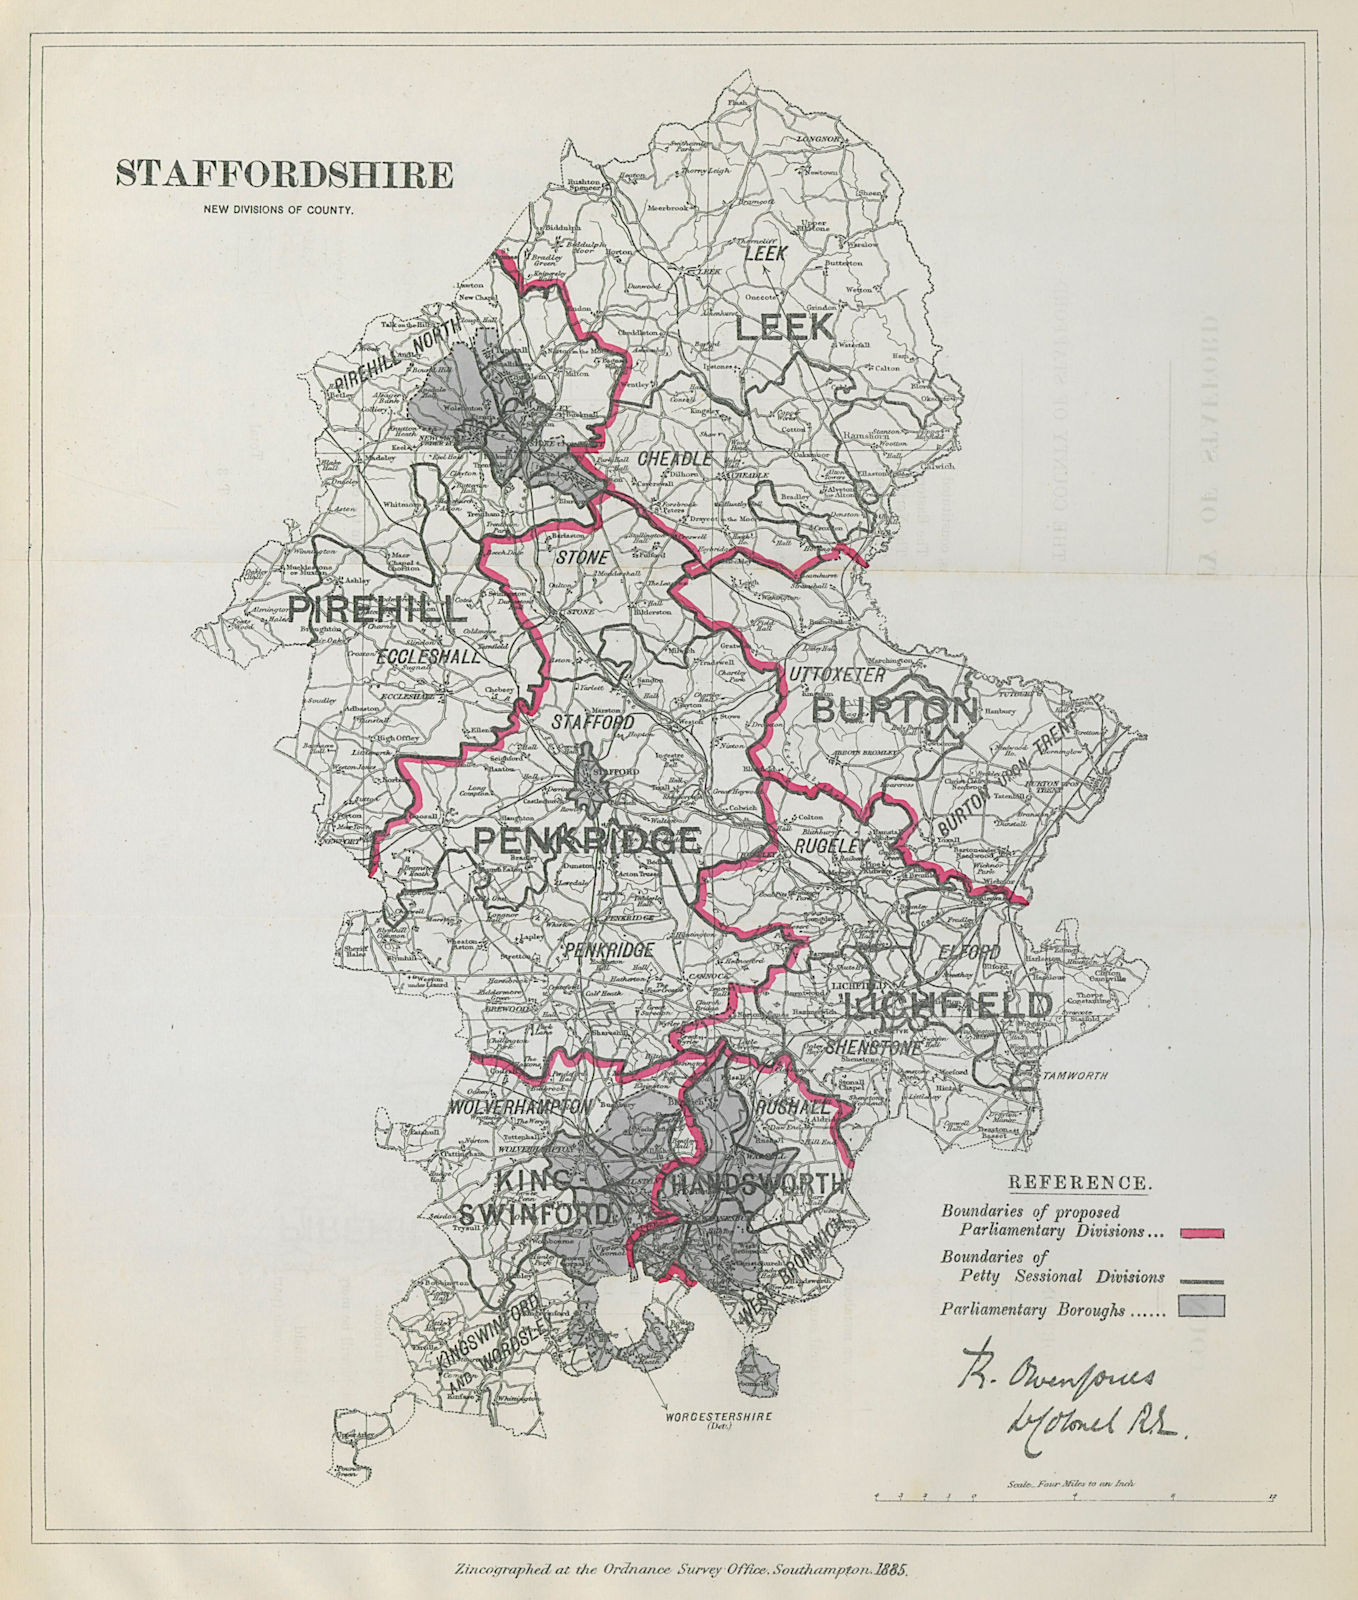 Associate Product Staffordshire Parliamentary Divisions. Lichfield. BOUNDARY COMMISSION 1885 map